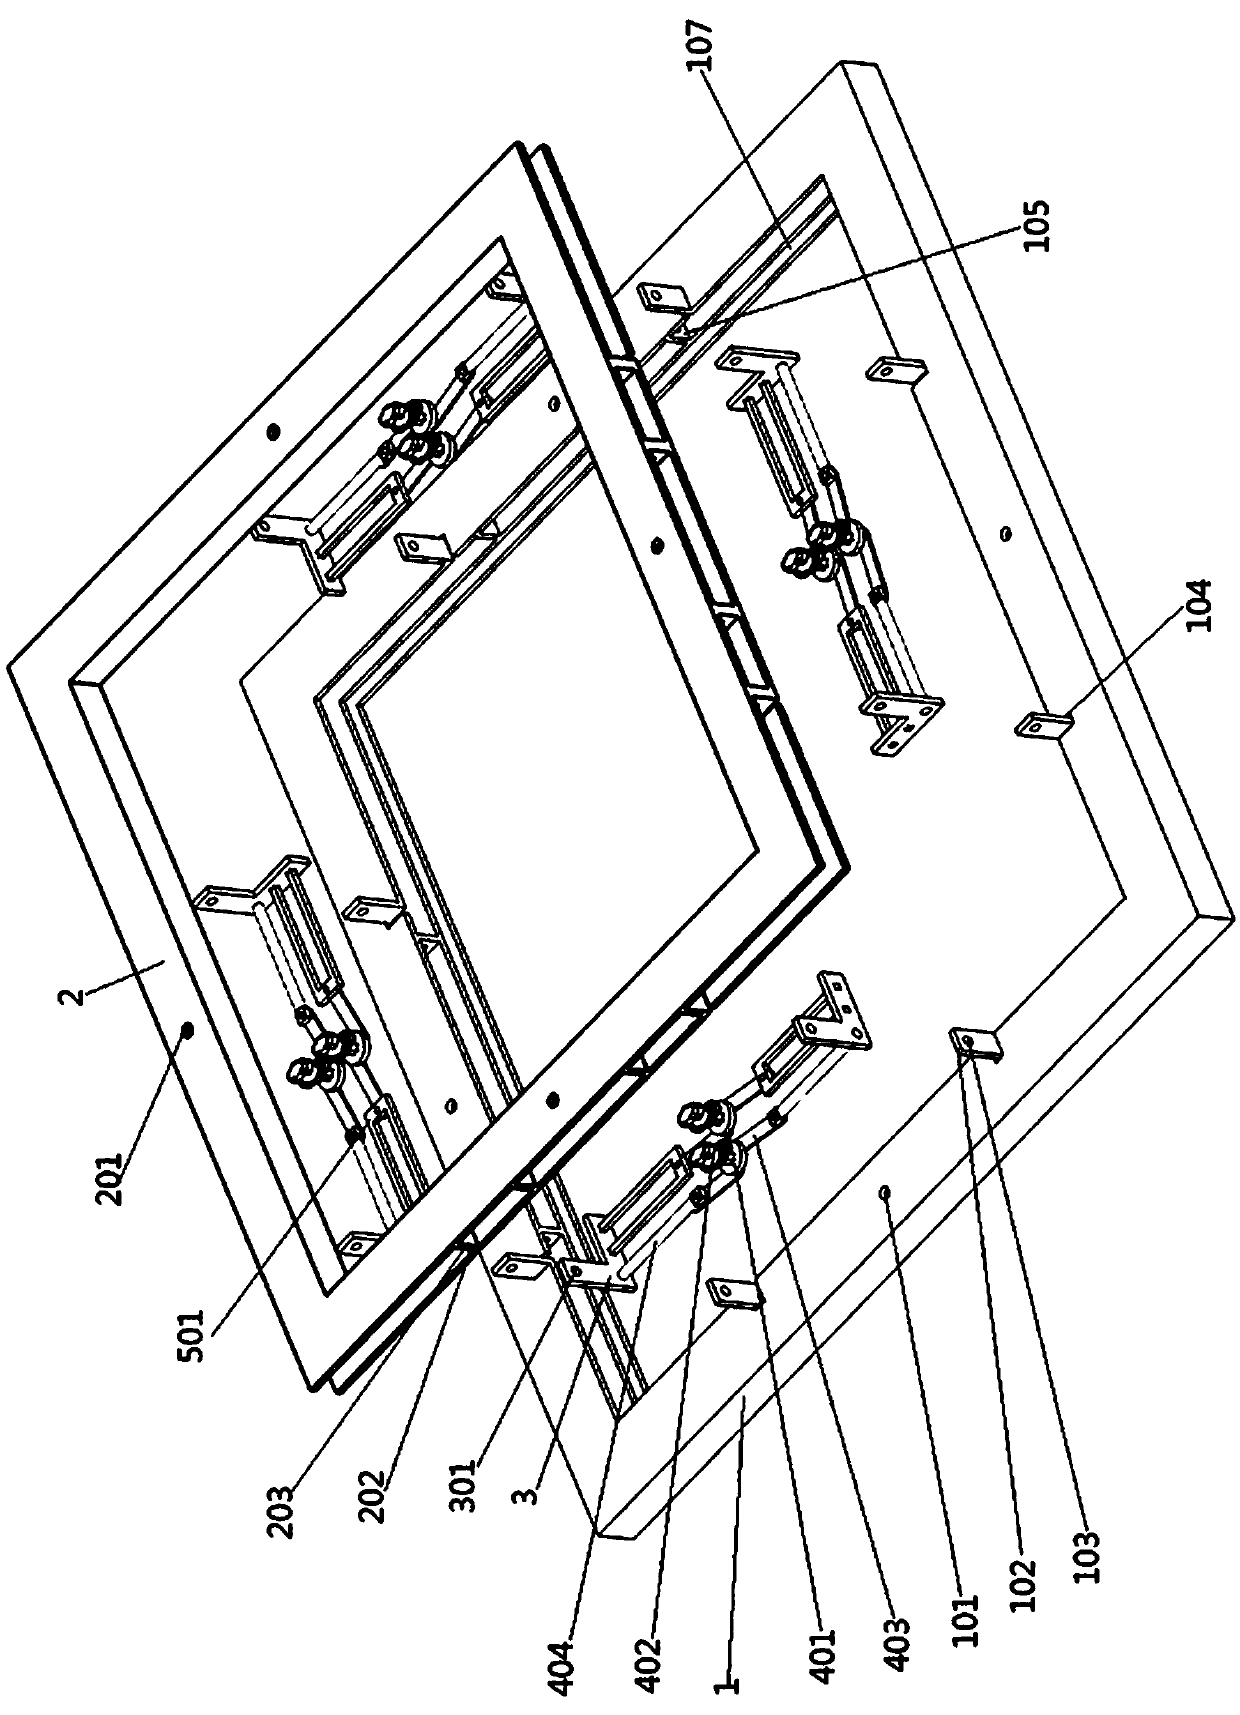 Connection structure of architectural window